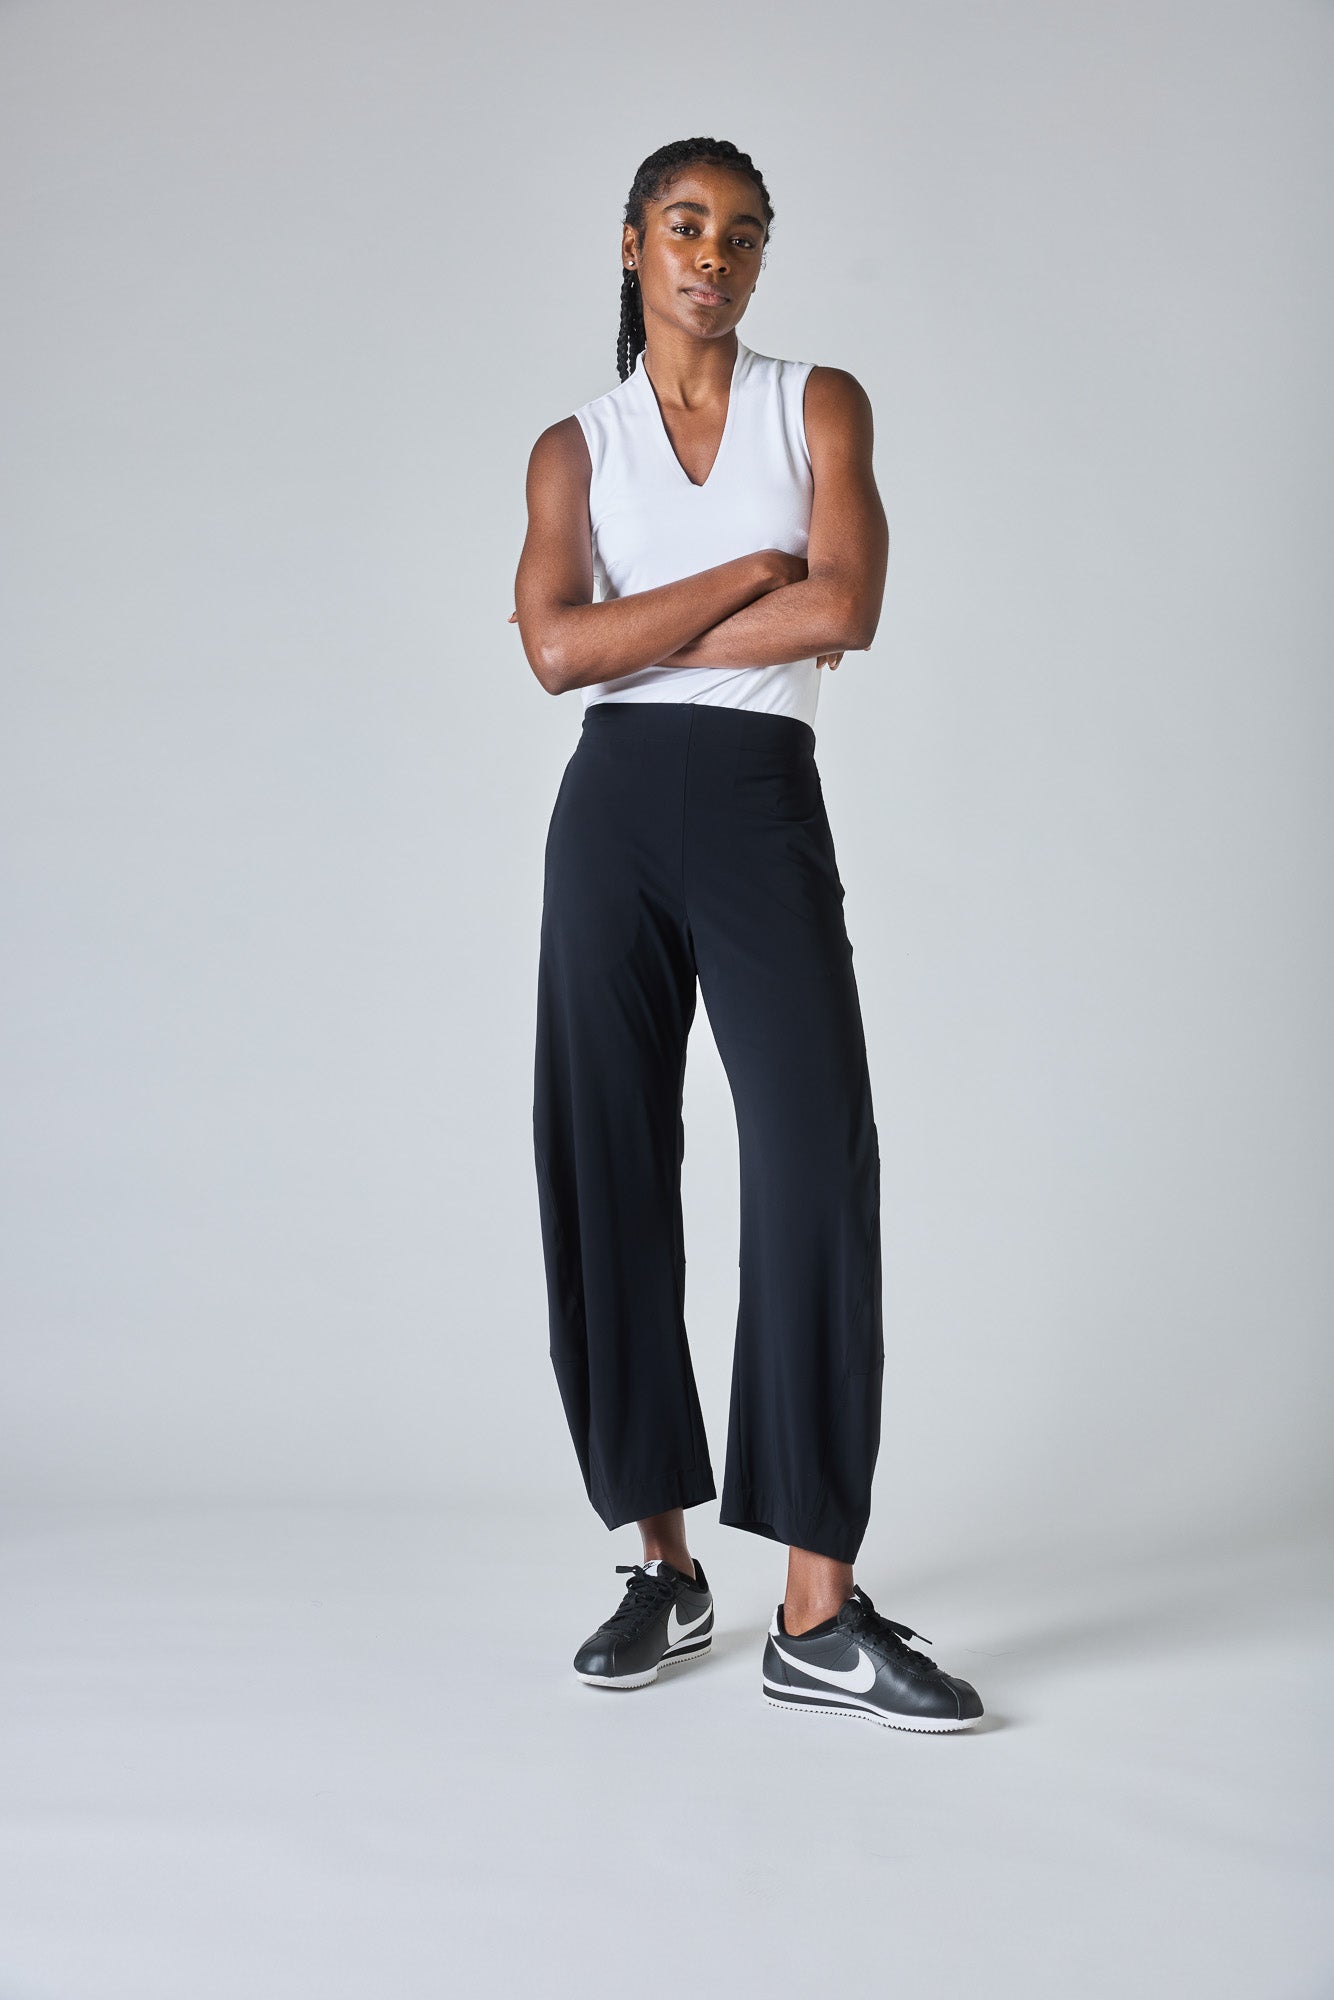 Monochromatic Work Outfit: Petite Black Wide Leg Trouser Pants | Black wide  leg trousers outfit, Wide leg pants outfit work, Black wide leg trousers